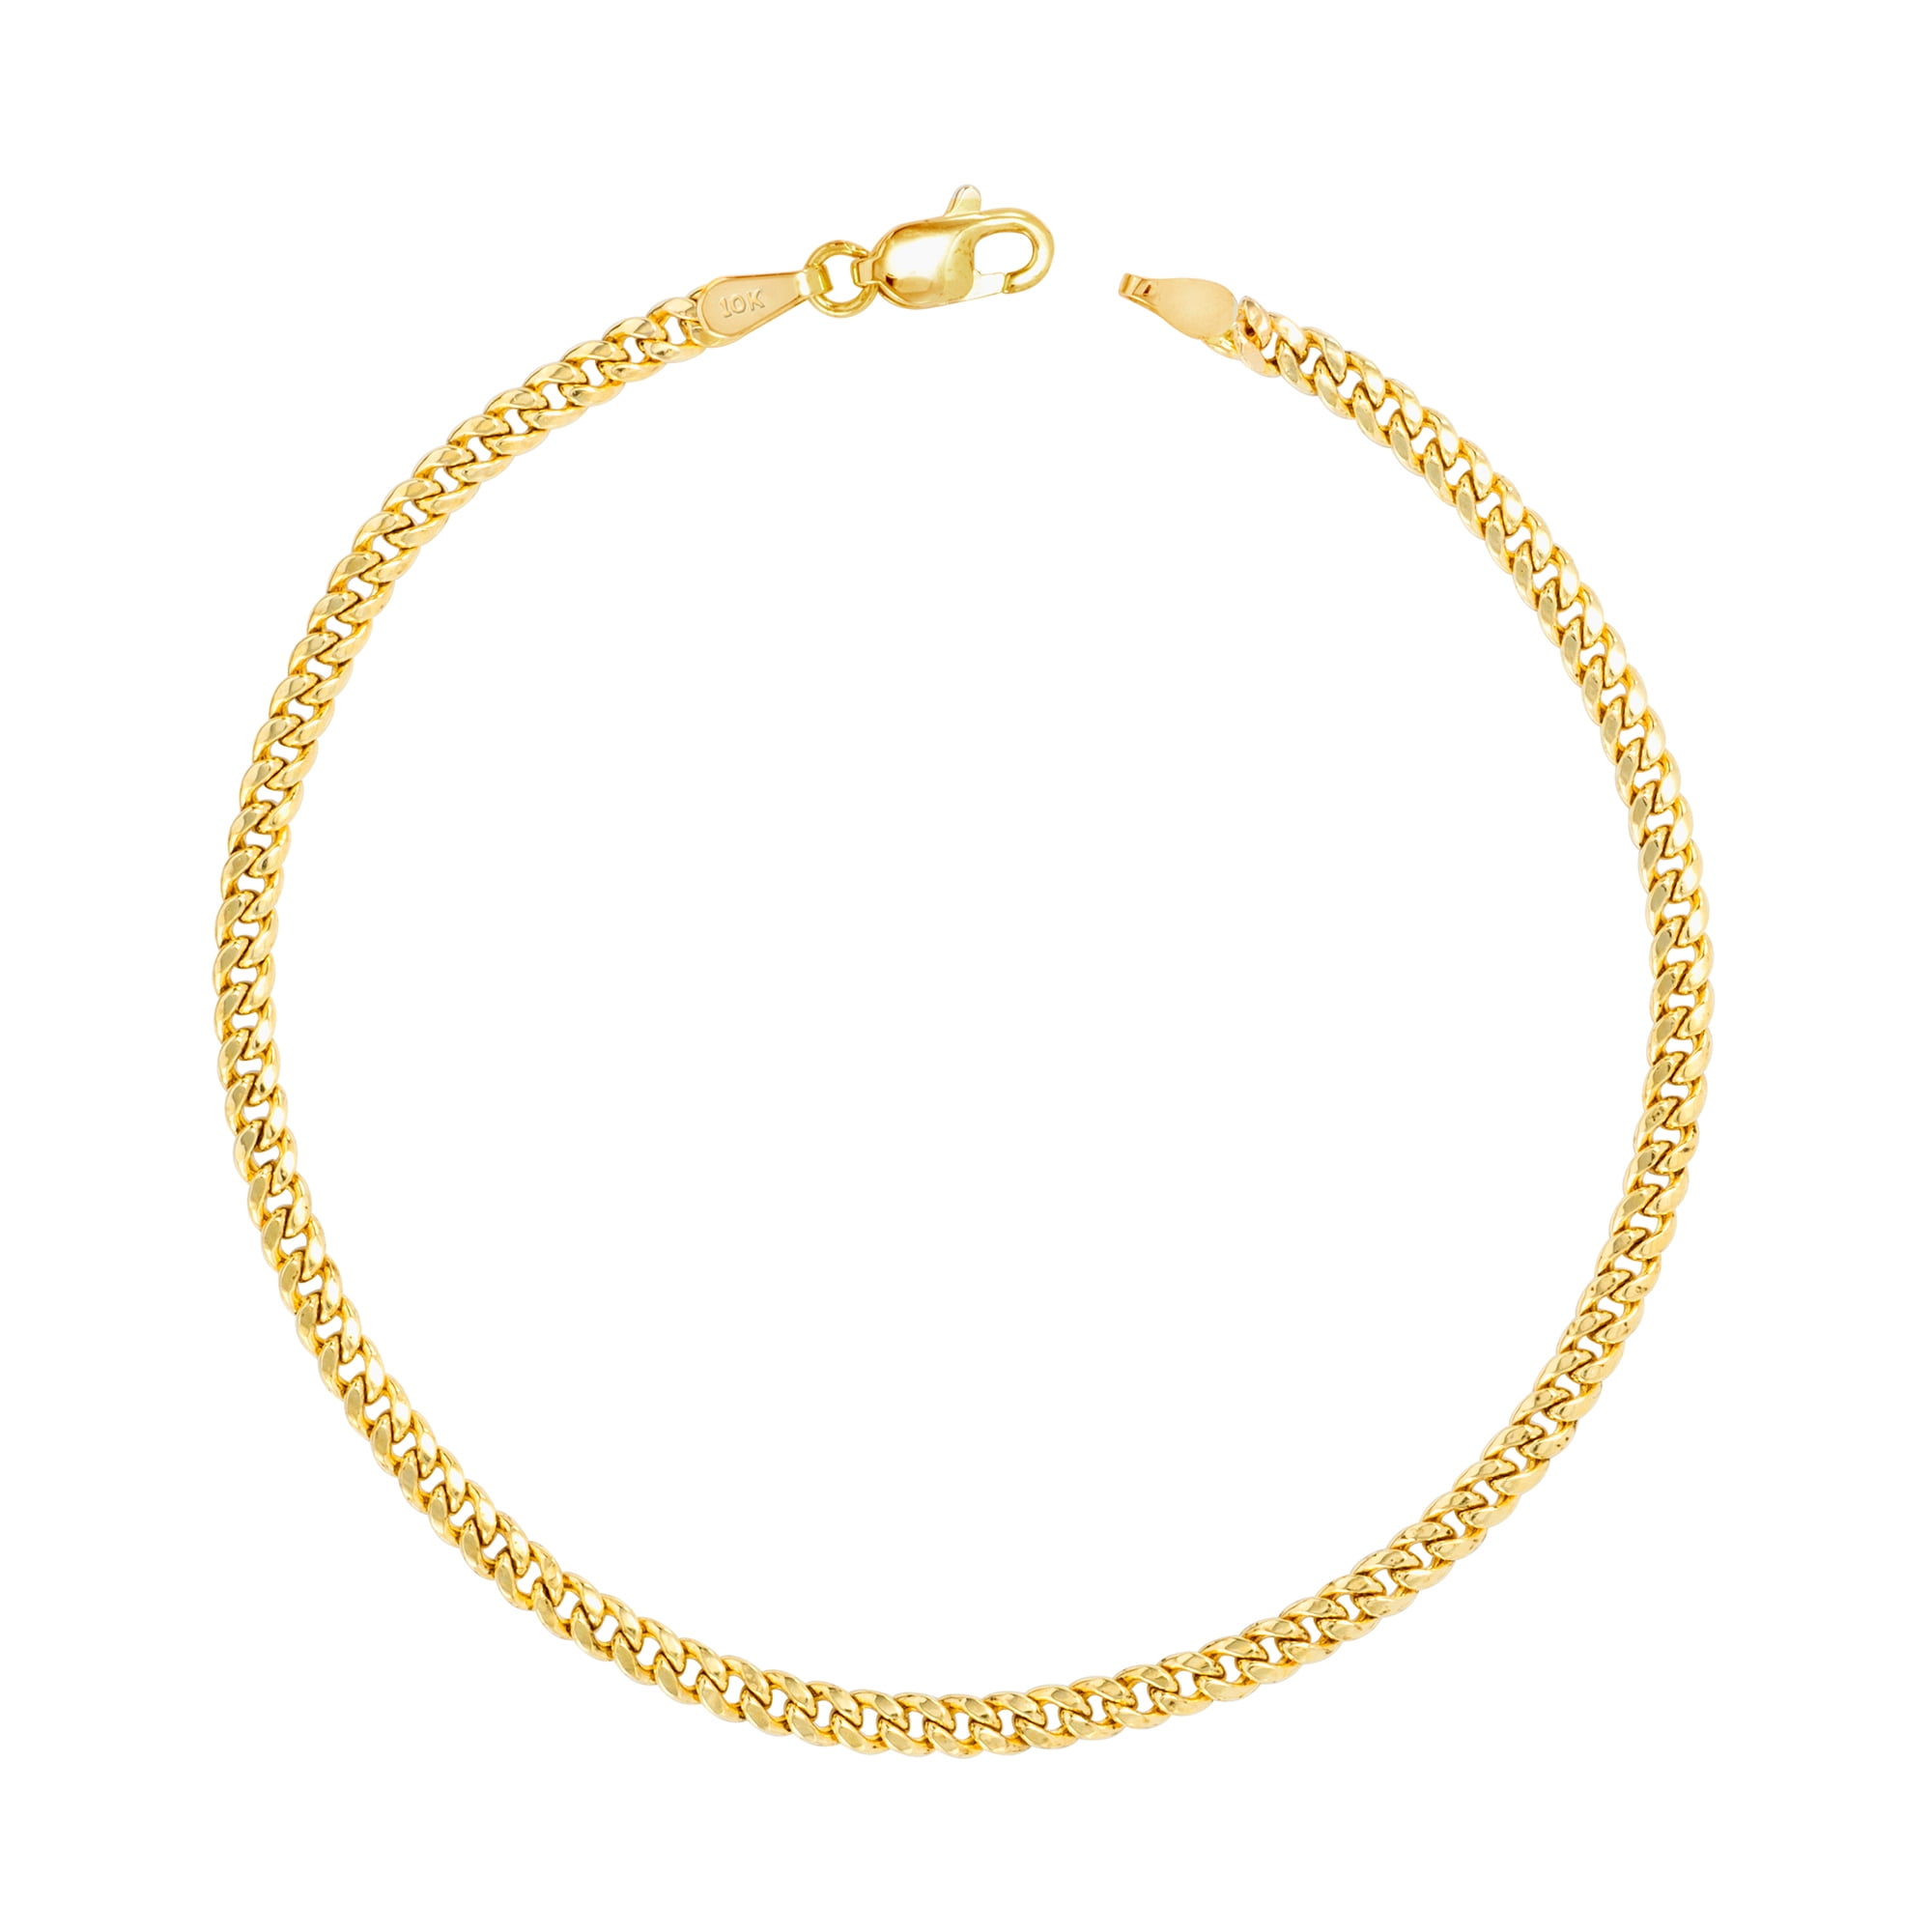 Floreo 10k Yellow Gold 4.3mm Hollow Curb Cuban Chain Bracelet and Anklet